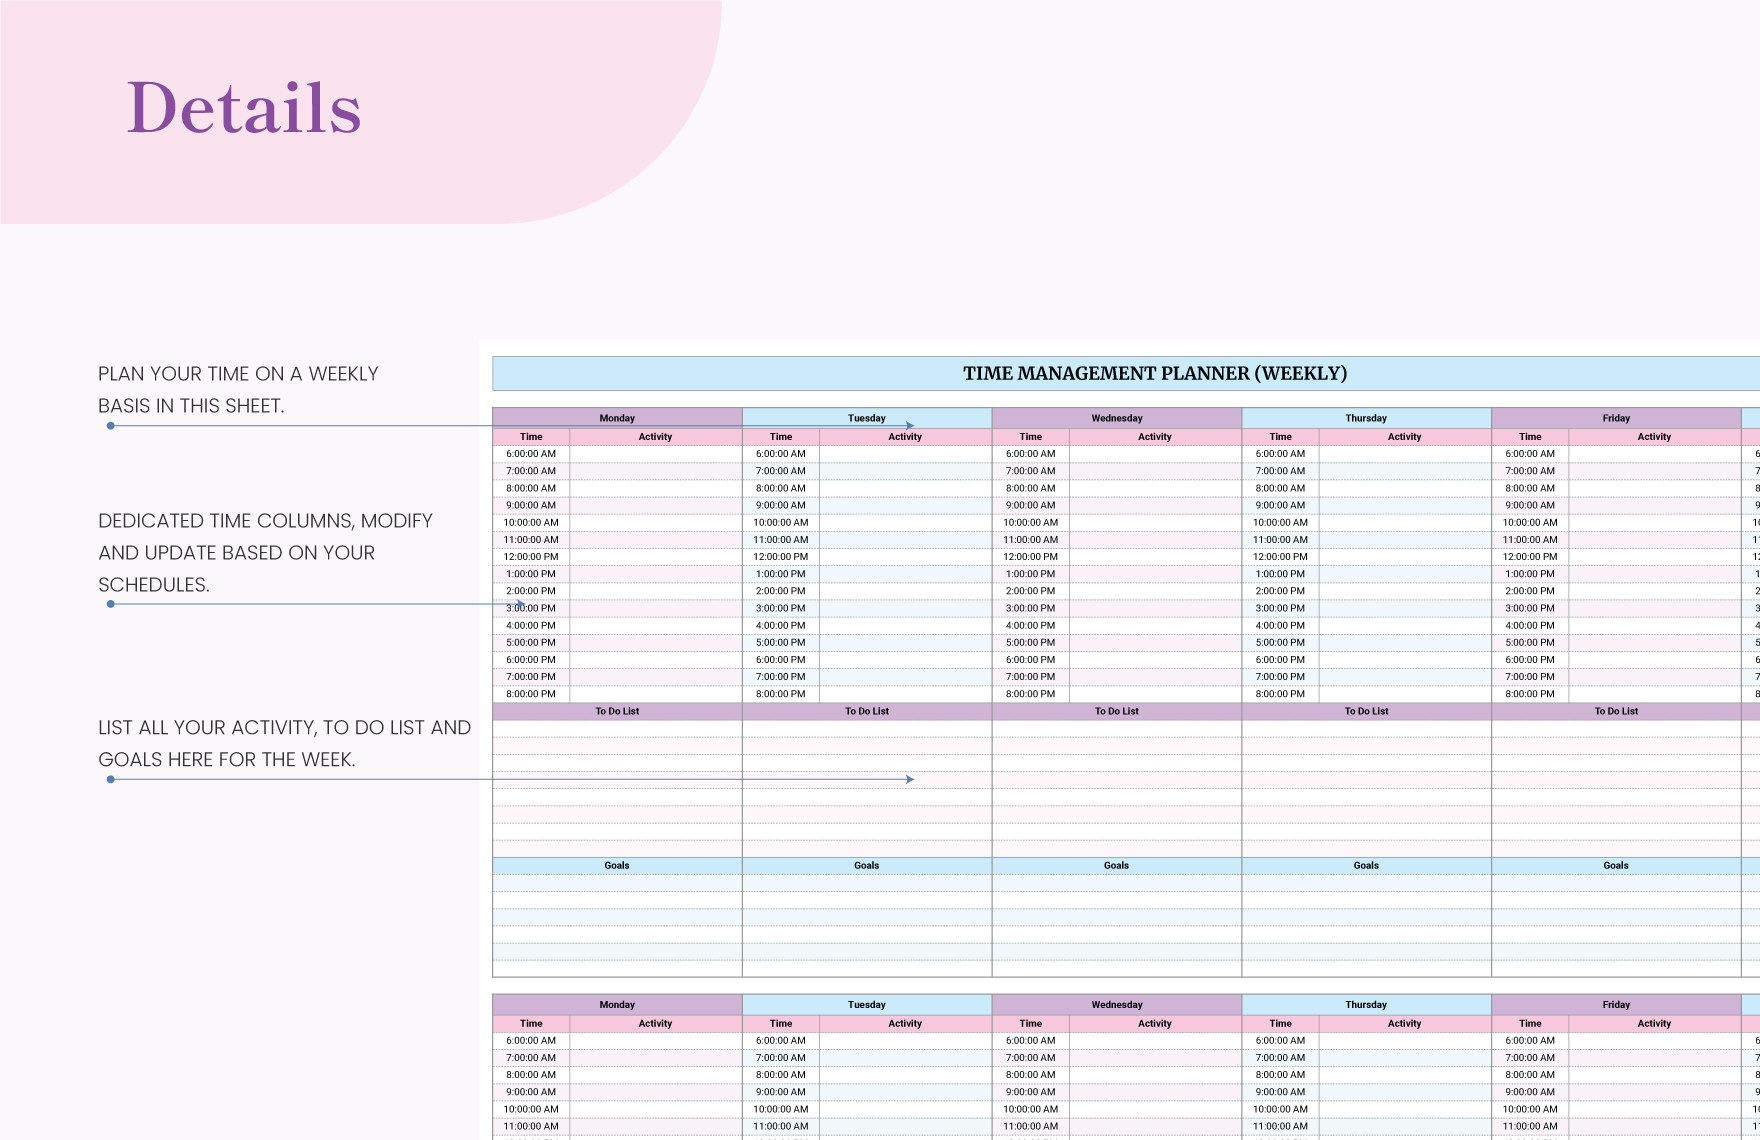 Time Management Planner Template